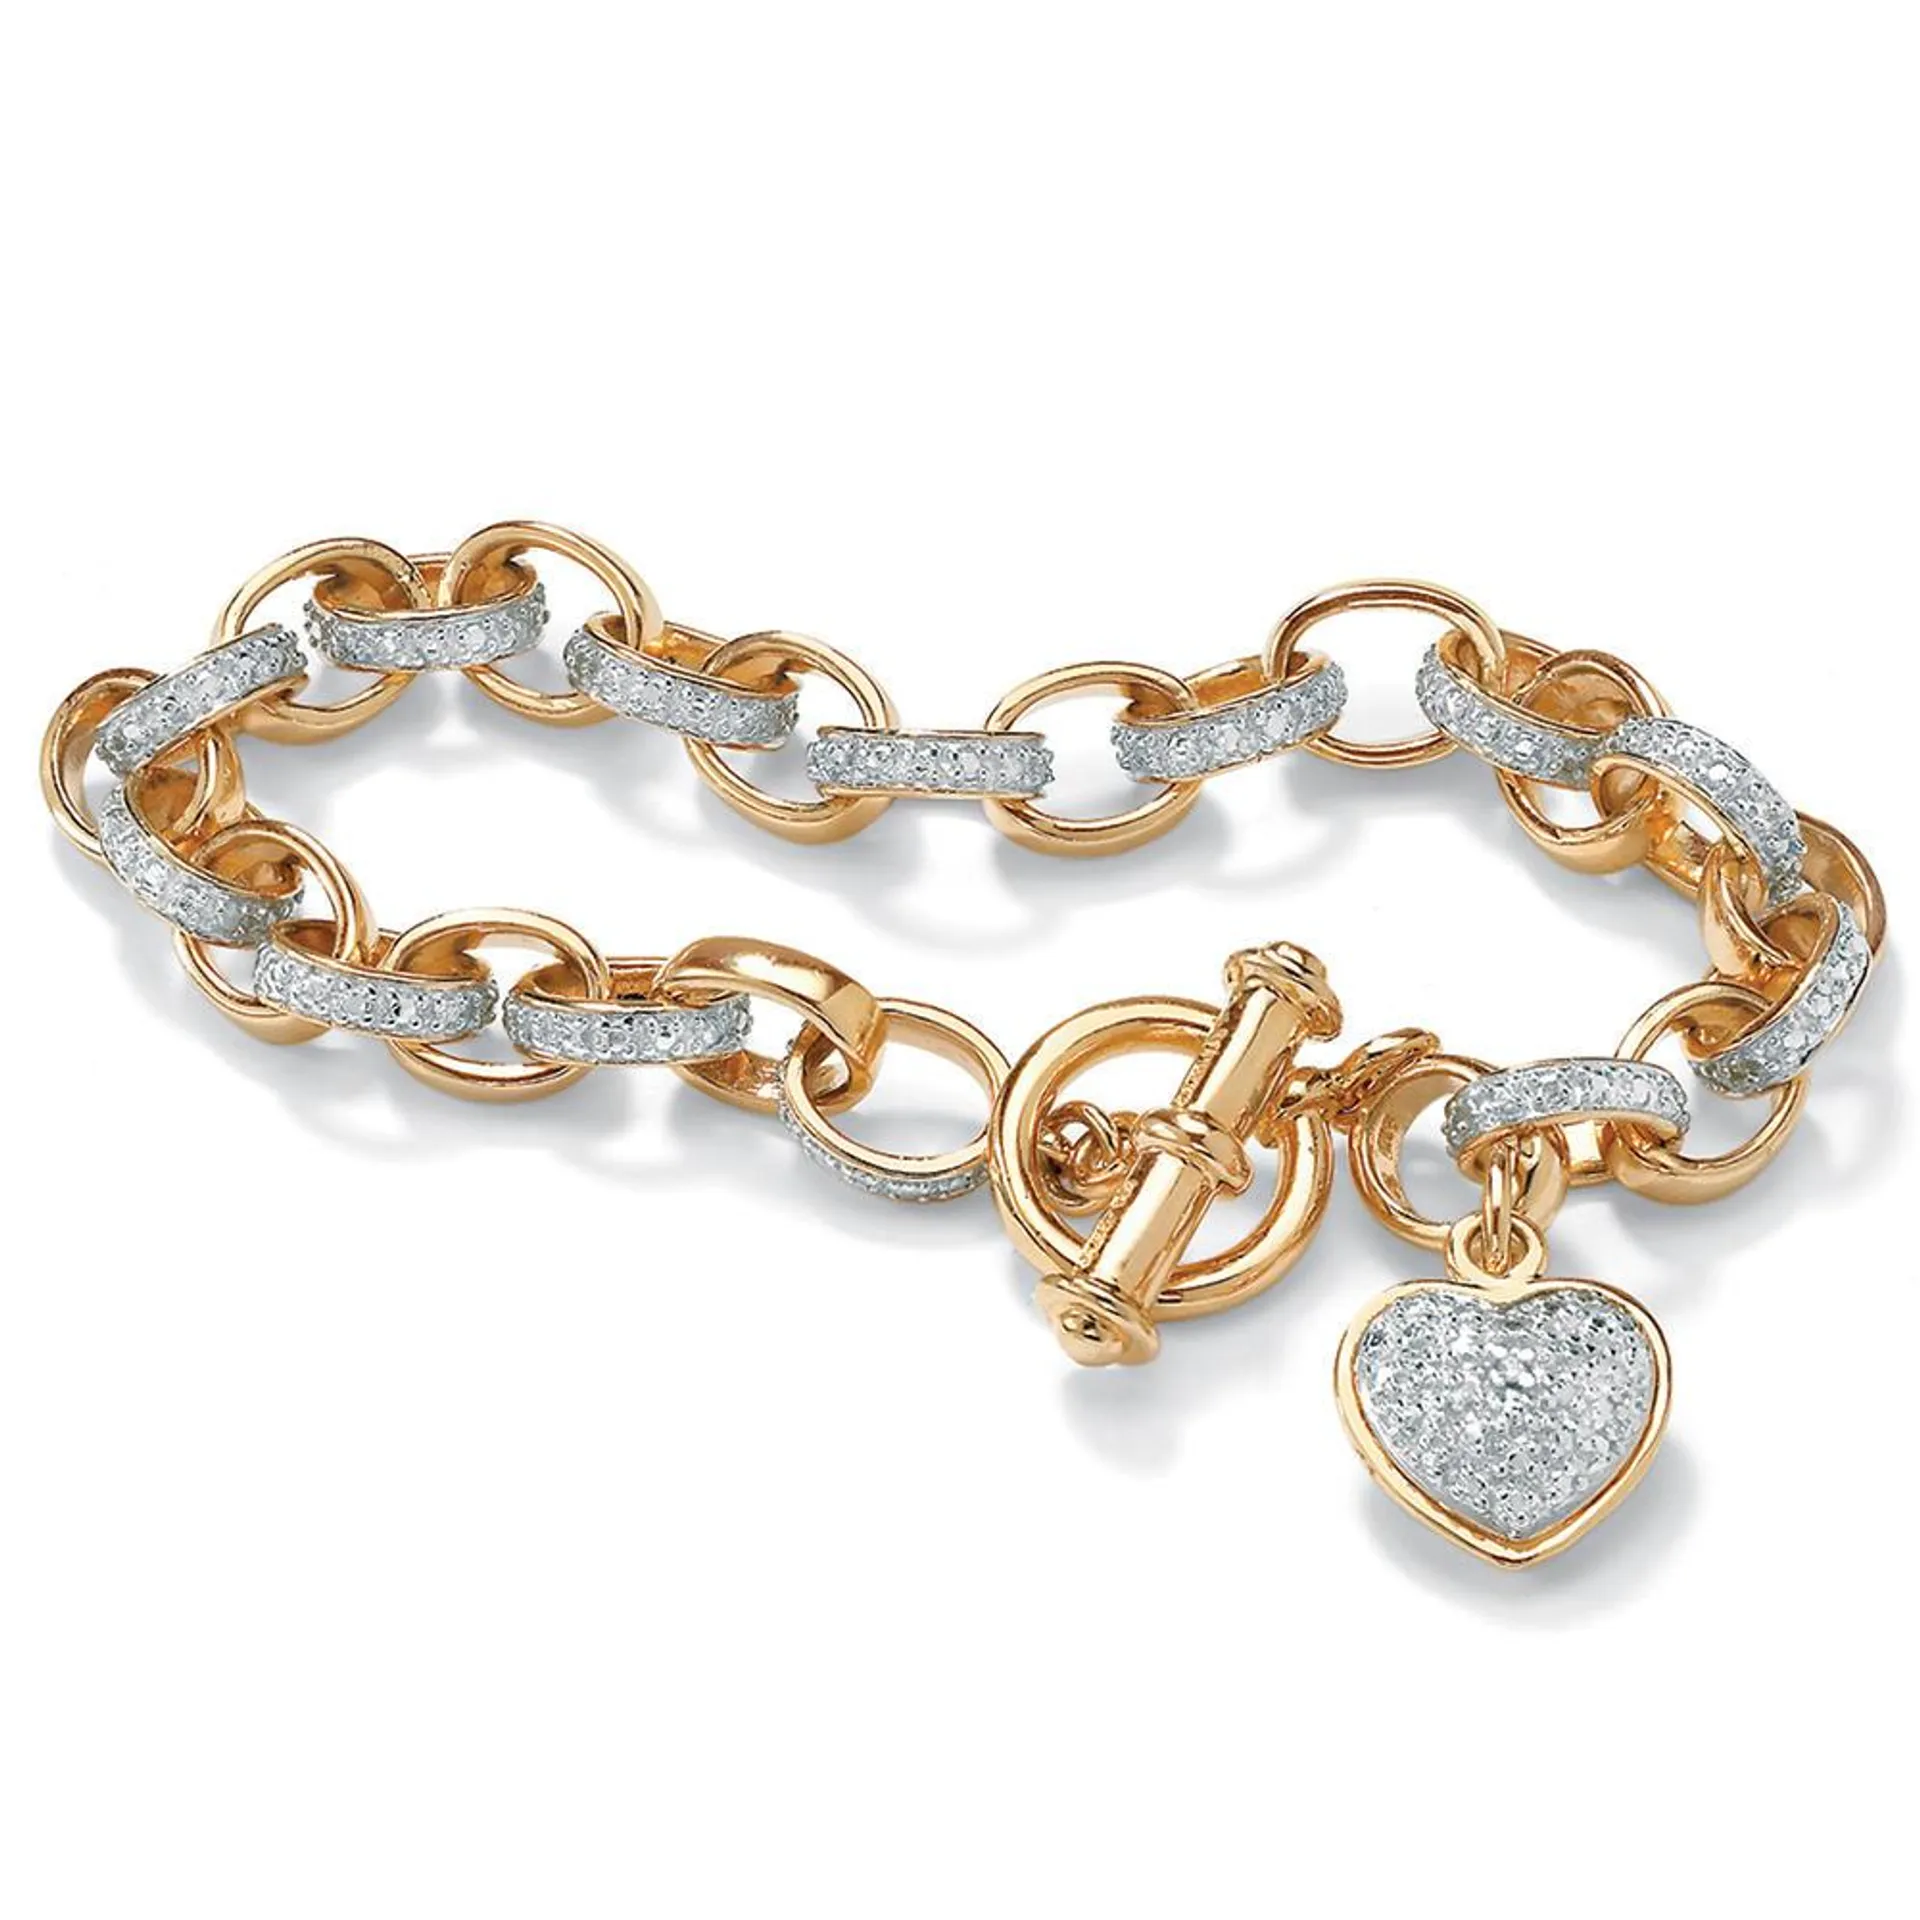 PalmBeach Jewelry Diamond Accent Heart Charm Bracelet in 14k Gold-plated Sterling Silver 7.25"